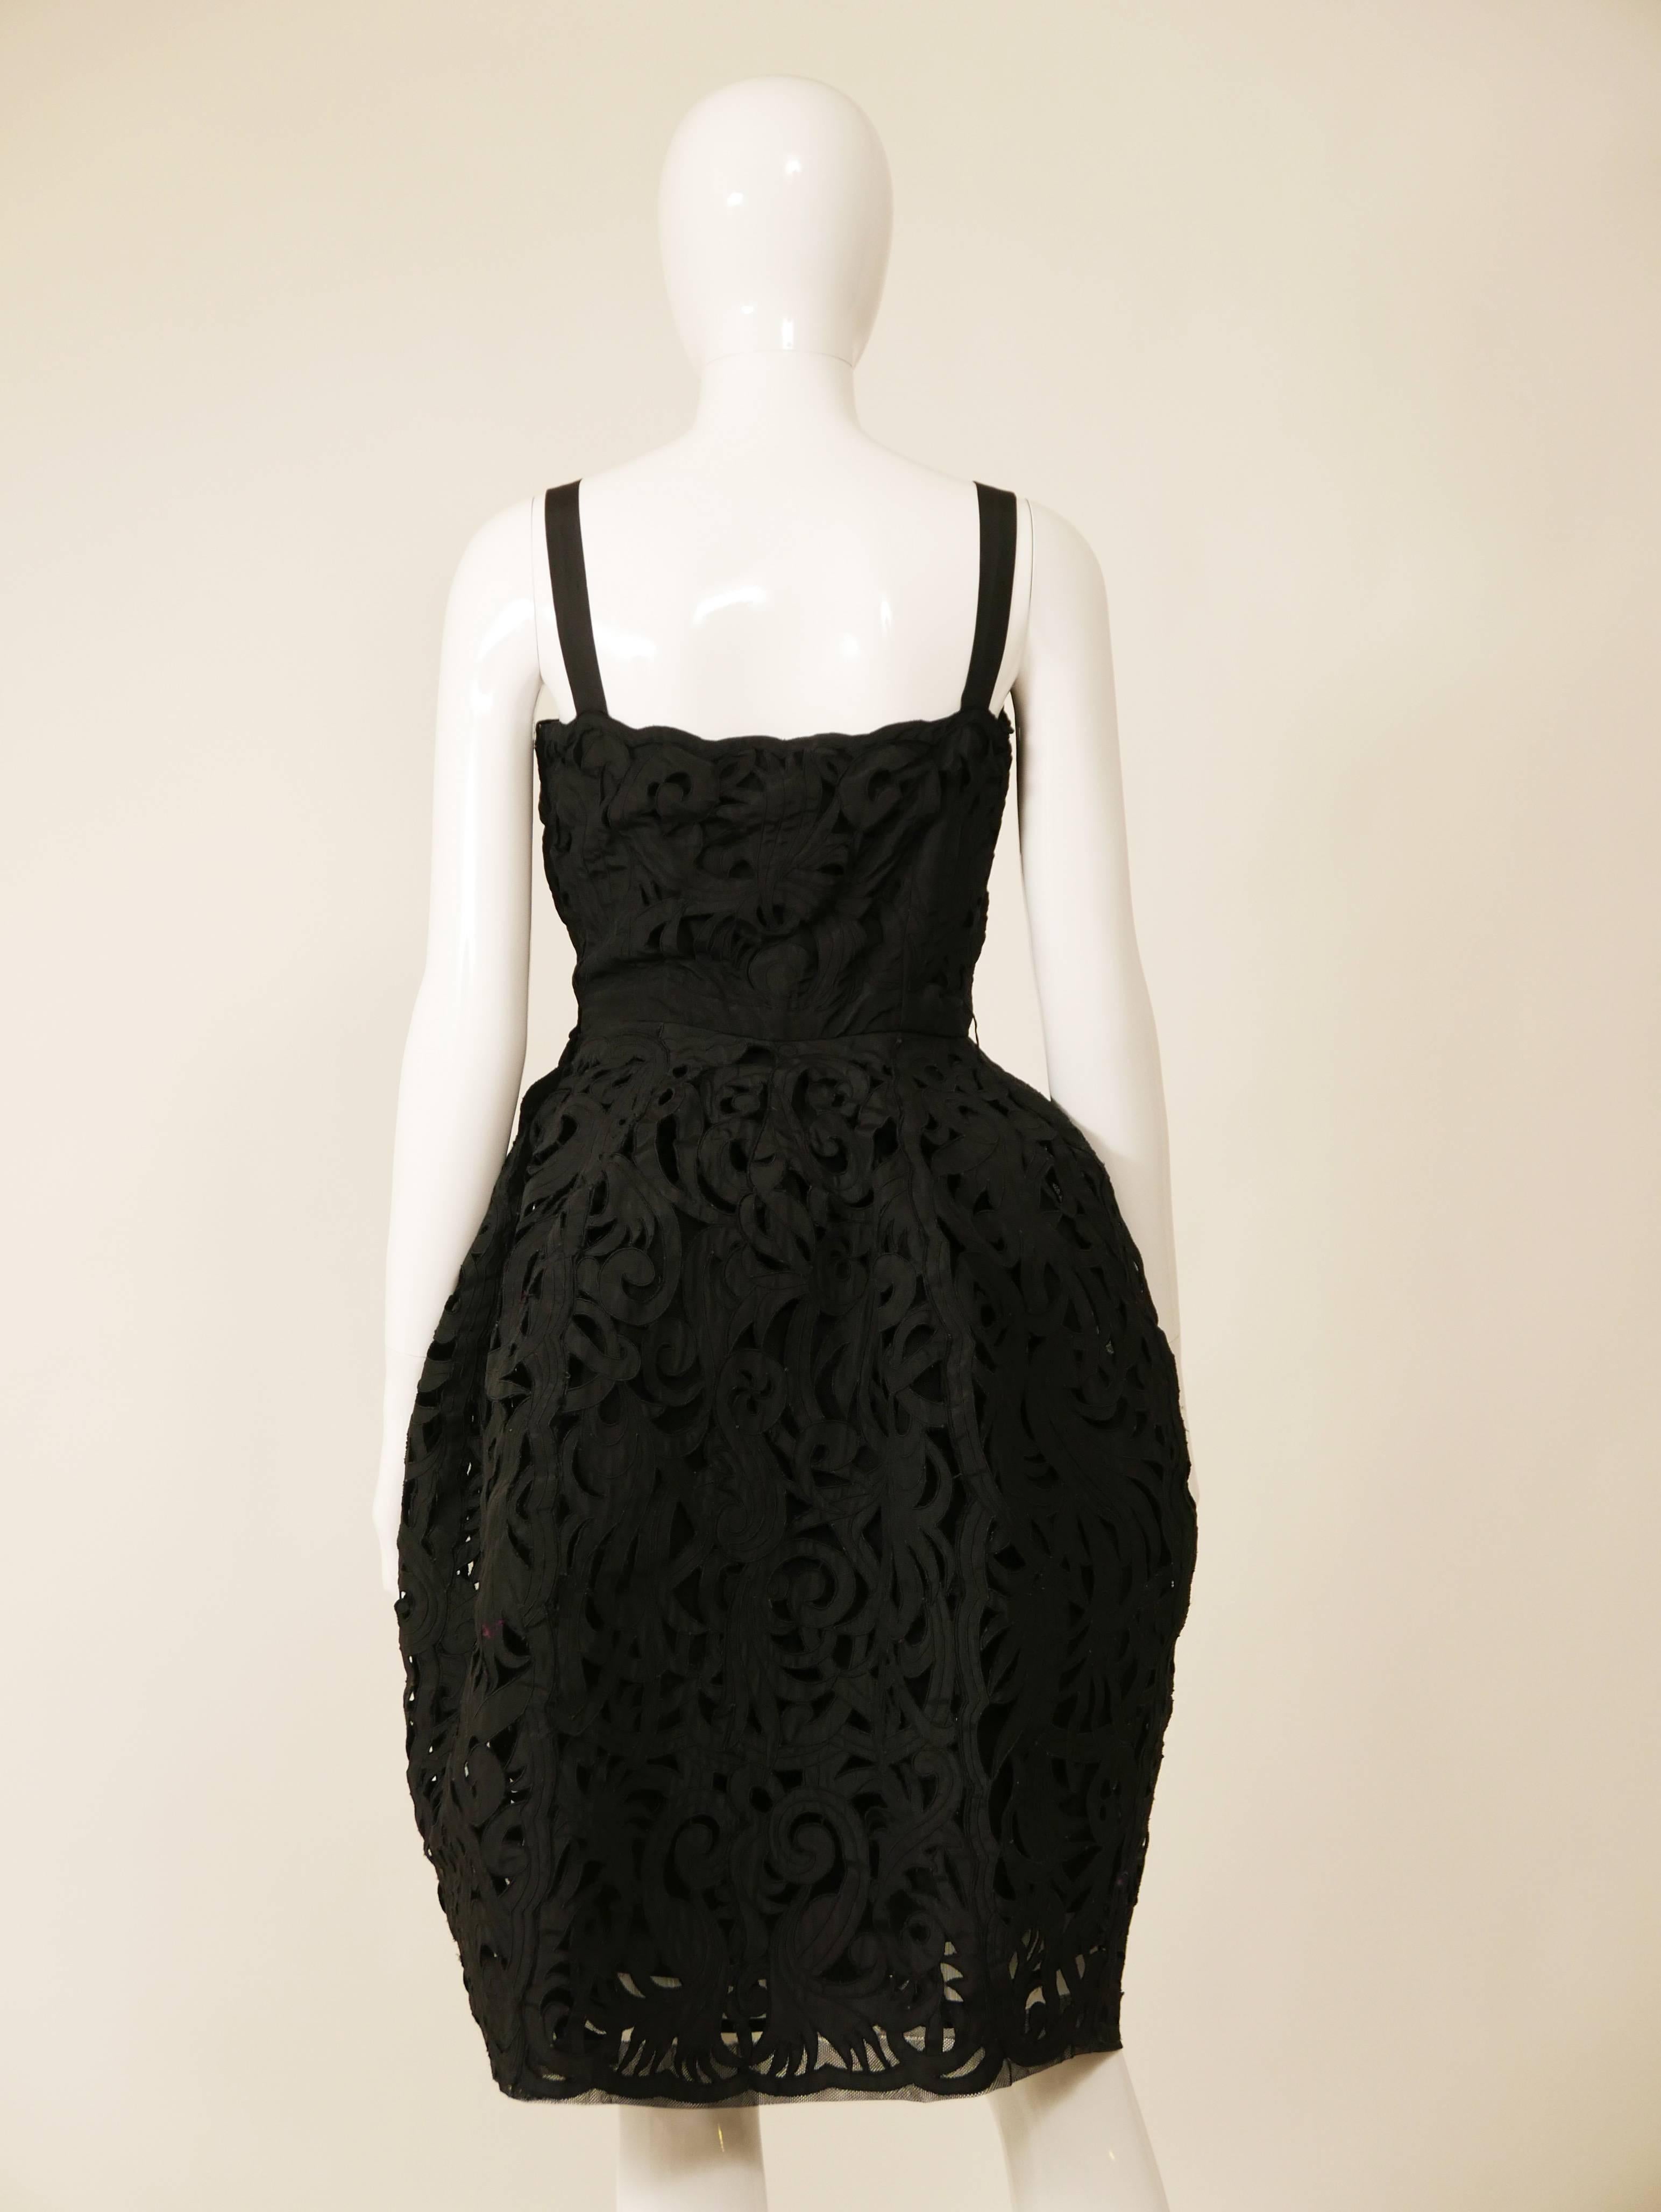 Black 1950s MARUCELLI Italian Couture Embroidered New Look Cocktail Dress